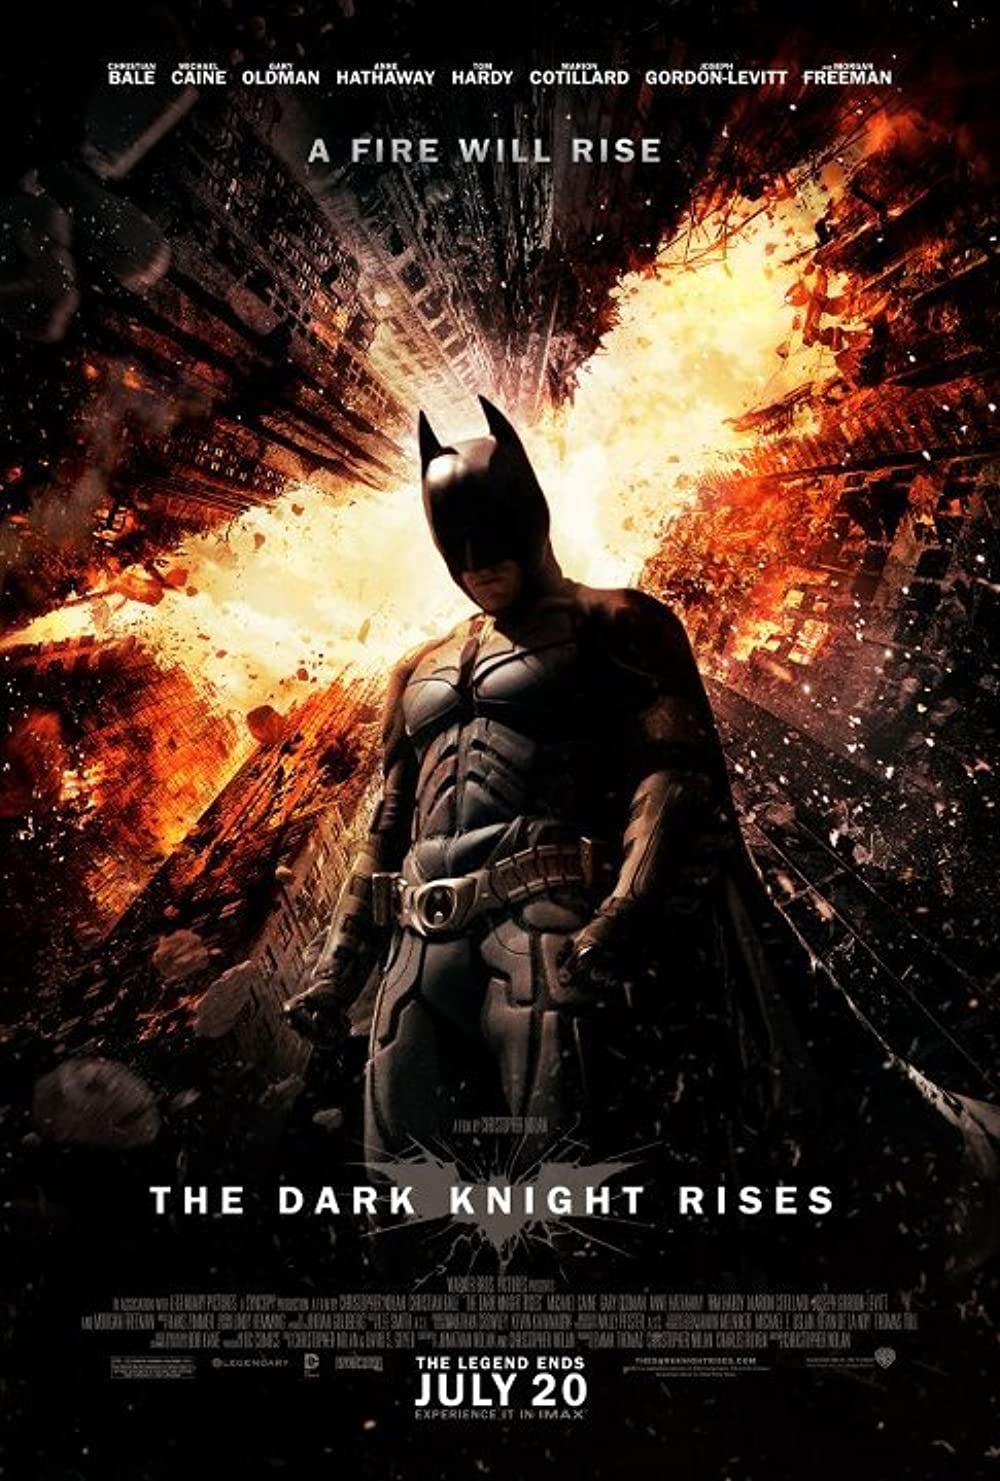 A film poster for the Batman movie, The Dark Knight Rises